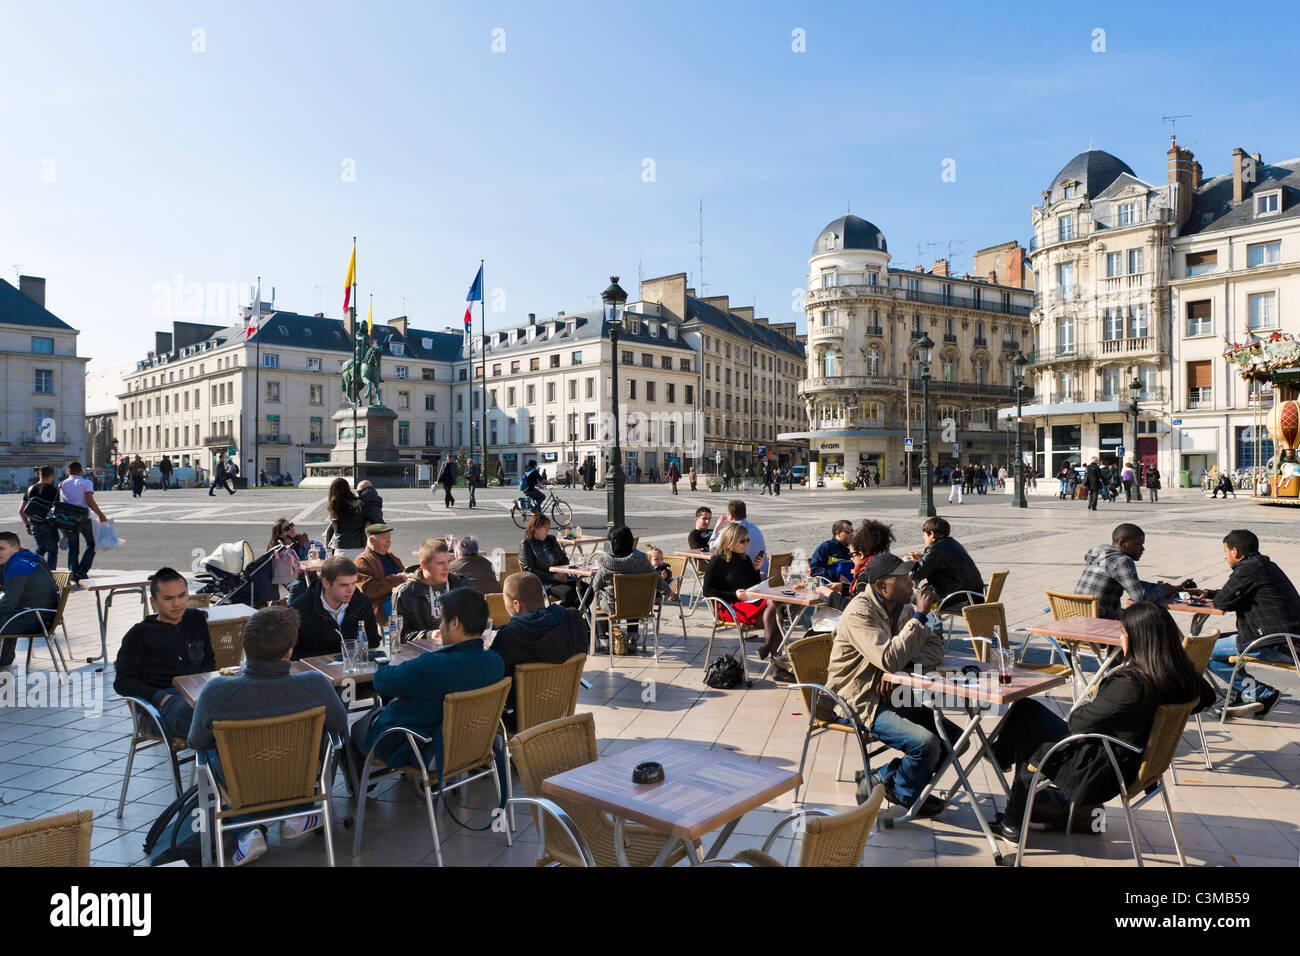 Pavement cafe in front of the statue of Joan of Arc, Place du Martroi, Orleans, France Stock Photo